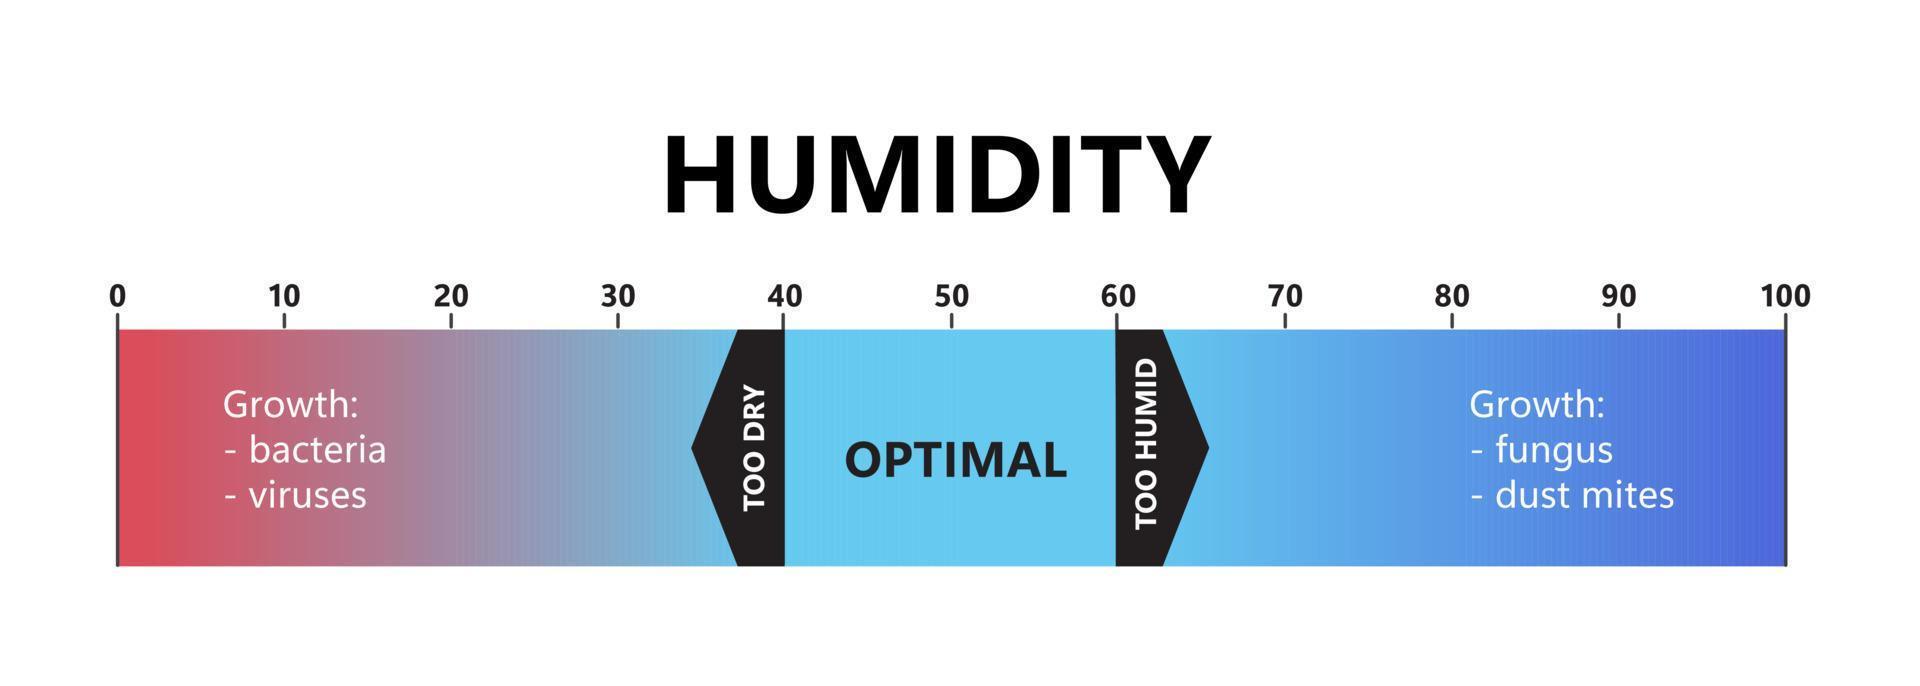 Humidity level. Optimal indoor humidity, too dry and too humid air. Air quality gradient scale. Comfortable microclimate conditions. Vector illustration isolated on white background